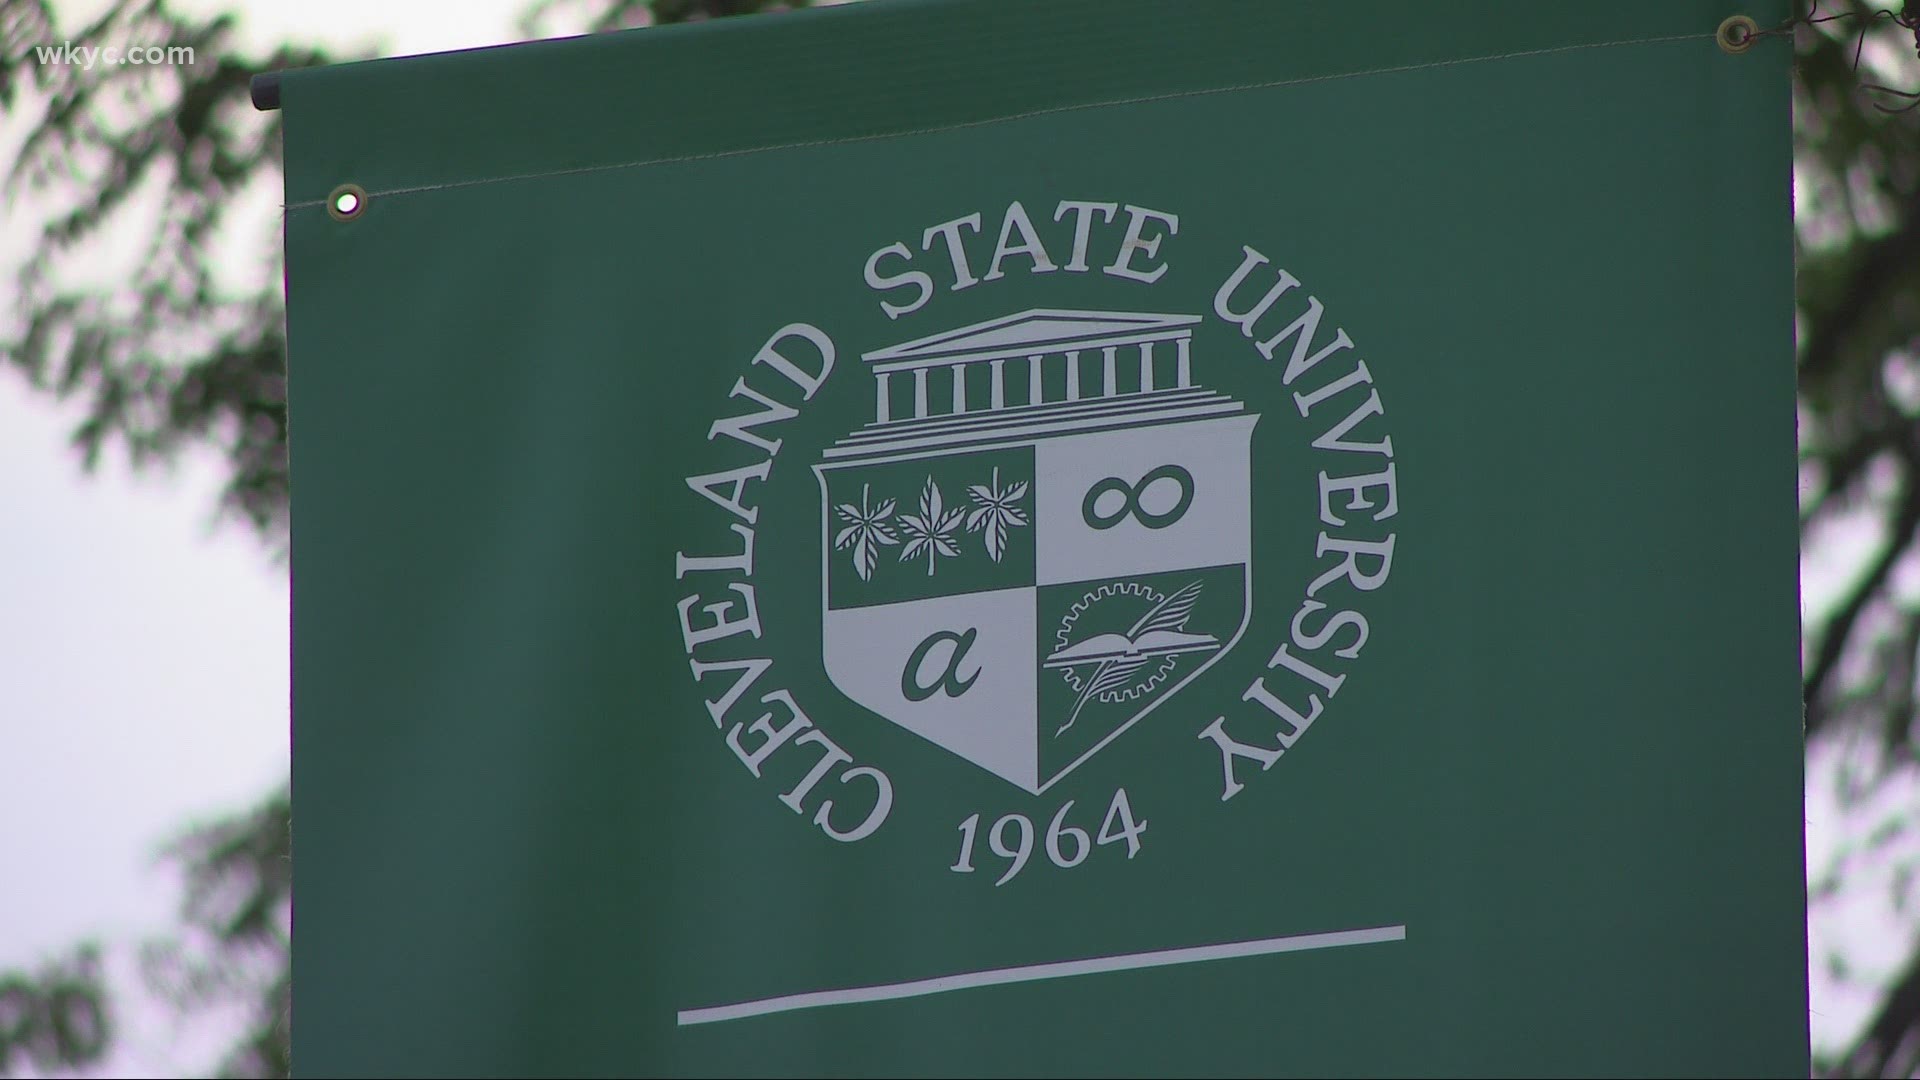 The law takes effect in 90 days, so CSU students living on campus still must be vaccinated when they move in Aug. 16.